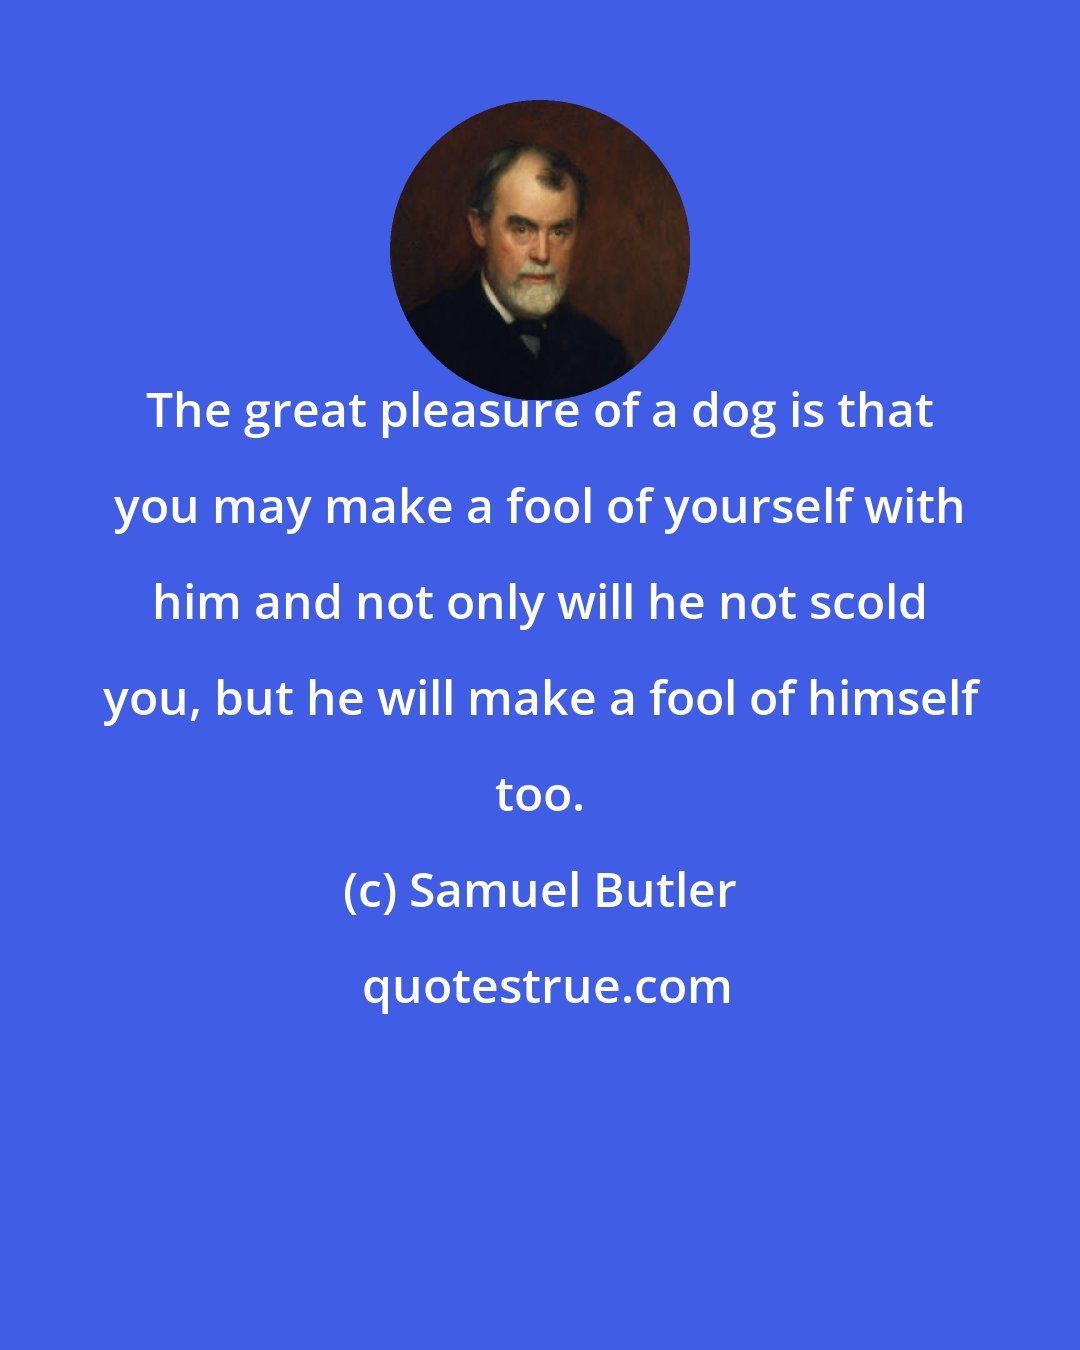 Samuel Butler: The great pleasure of a dog is that you may make a fool of yourself with him and not only will he not scold you, but he will make a fool of himself too.